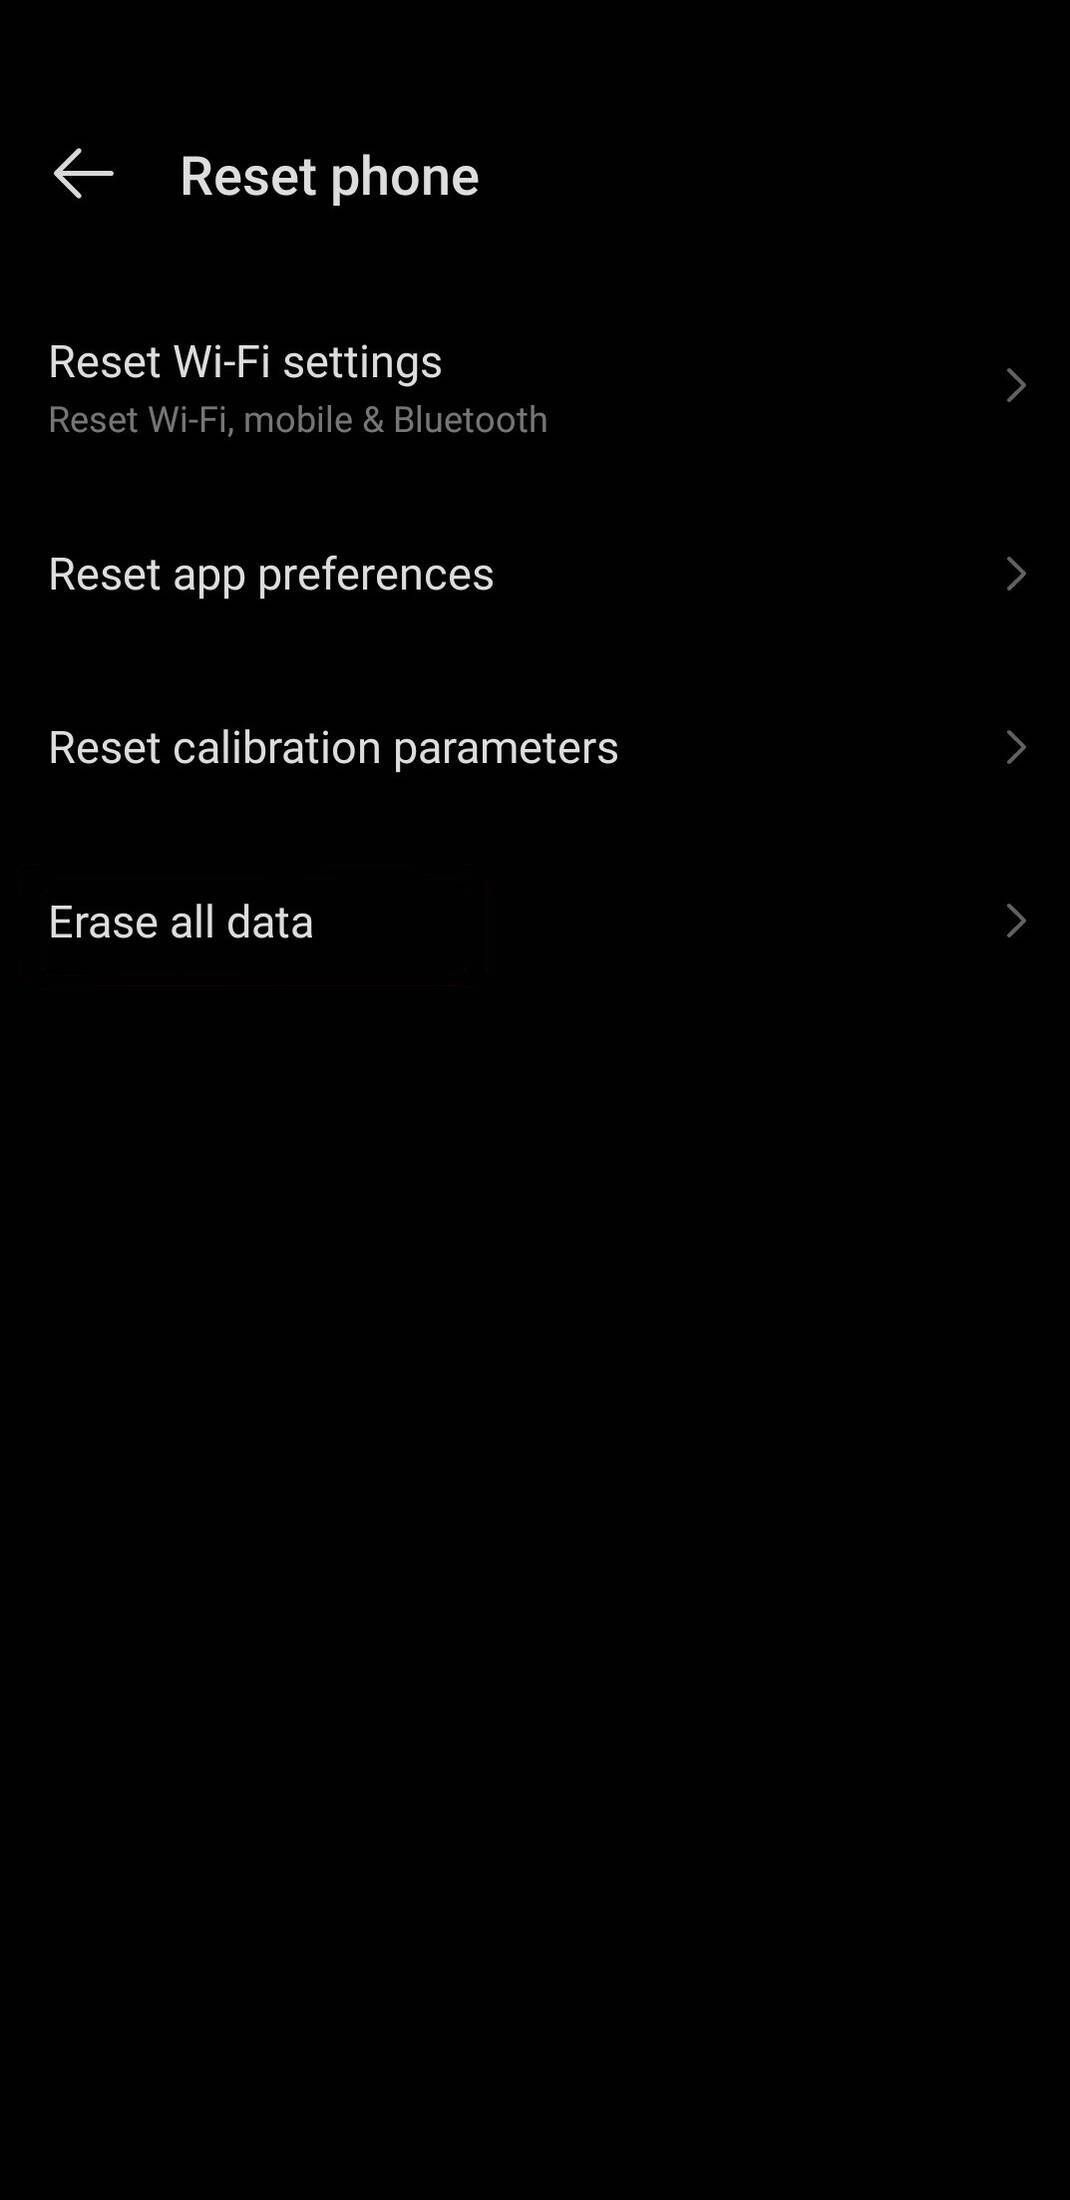 The reset phone menu shows Erase all data and other options